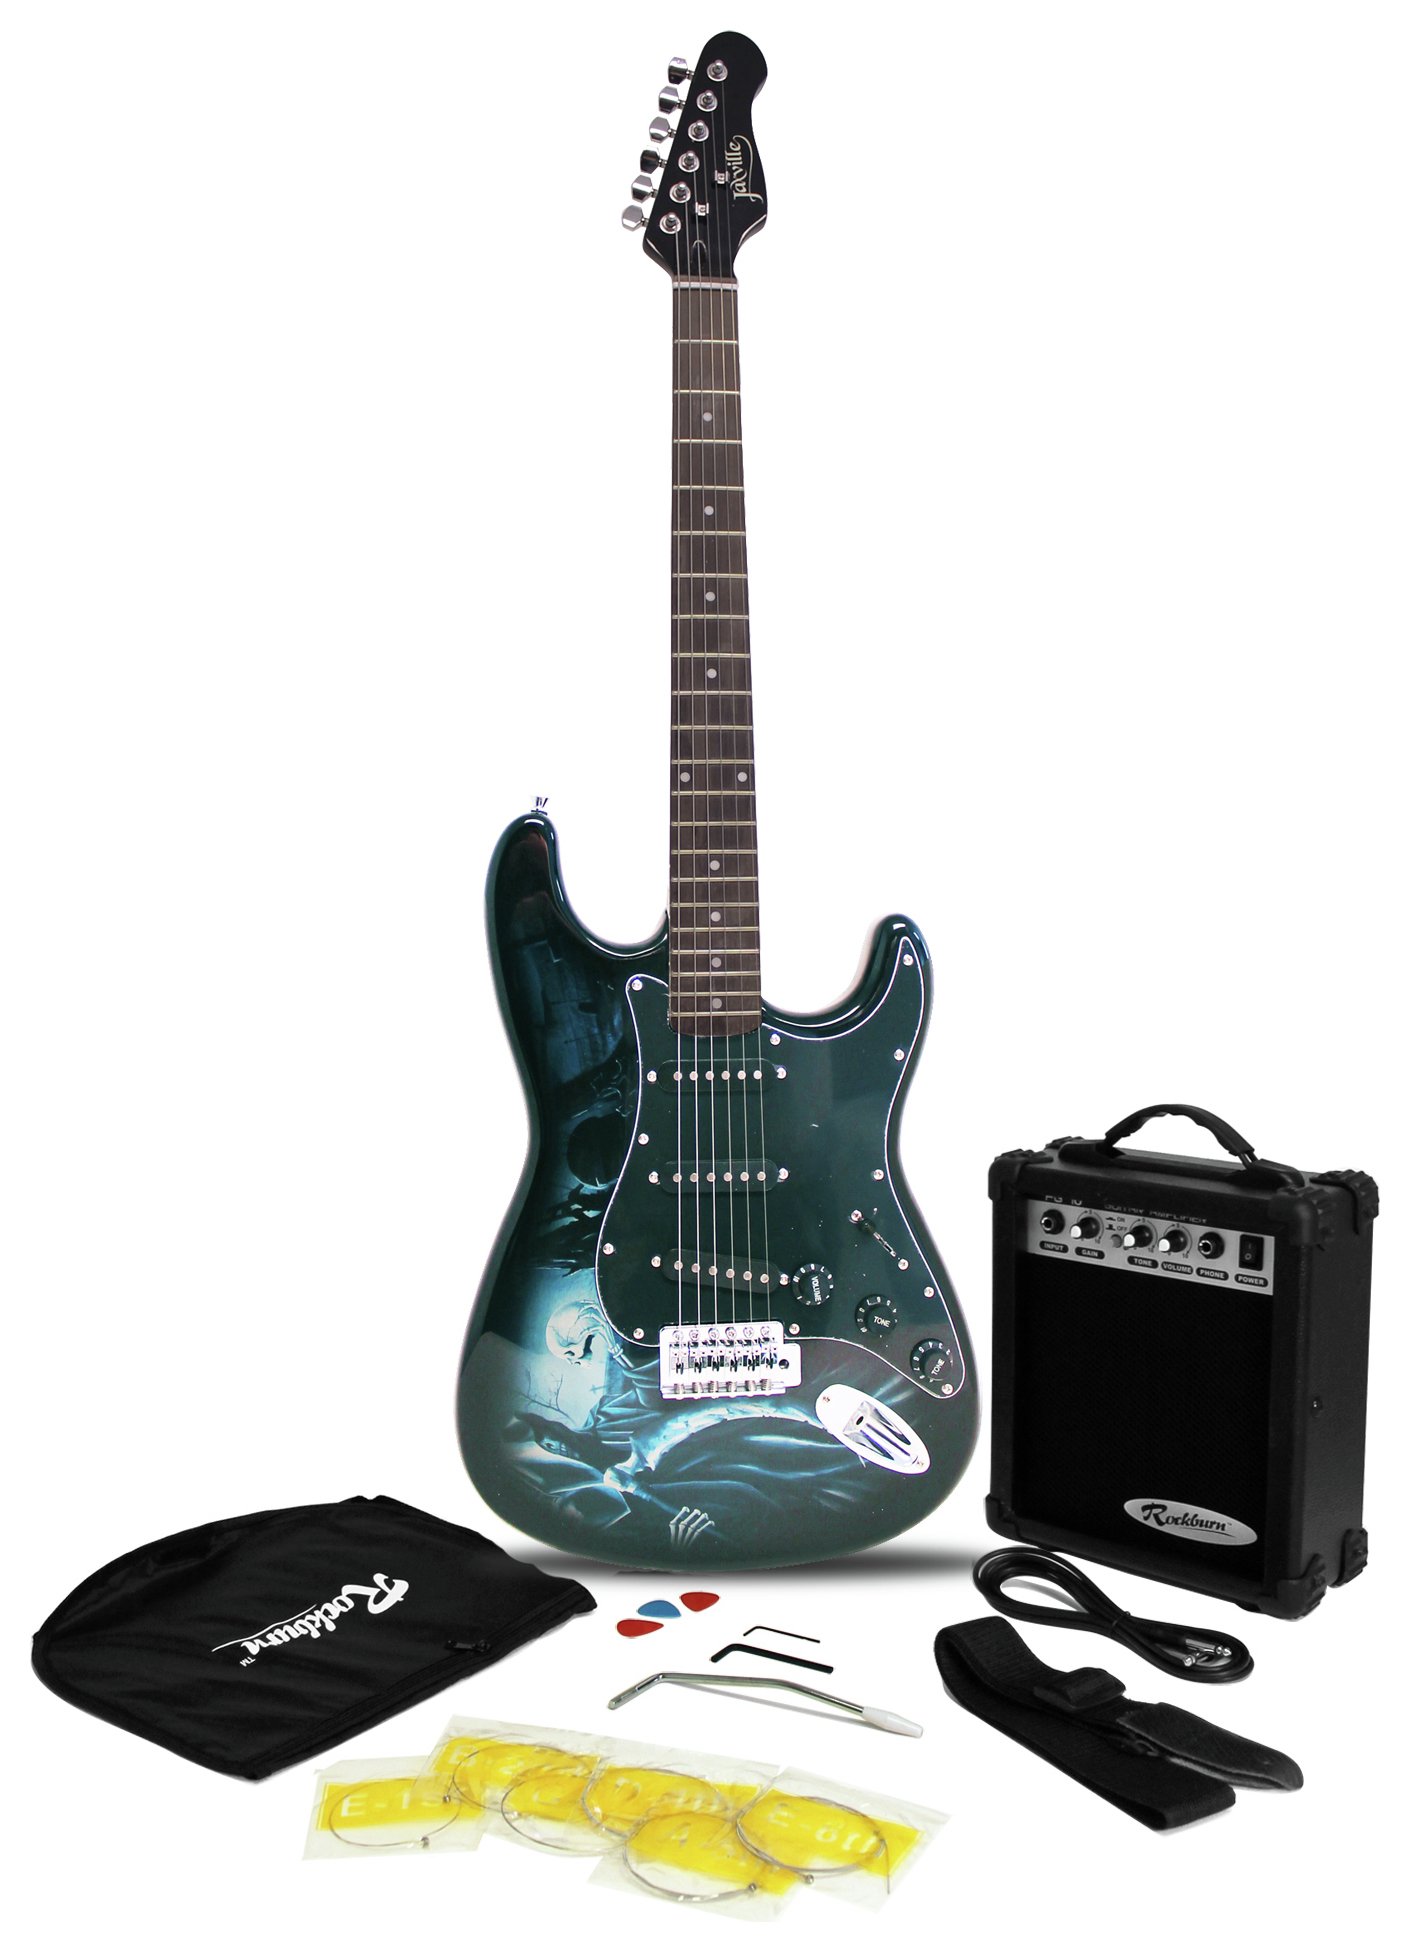 Jaxville Full Size Electric Guitar & Accessories - Hades